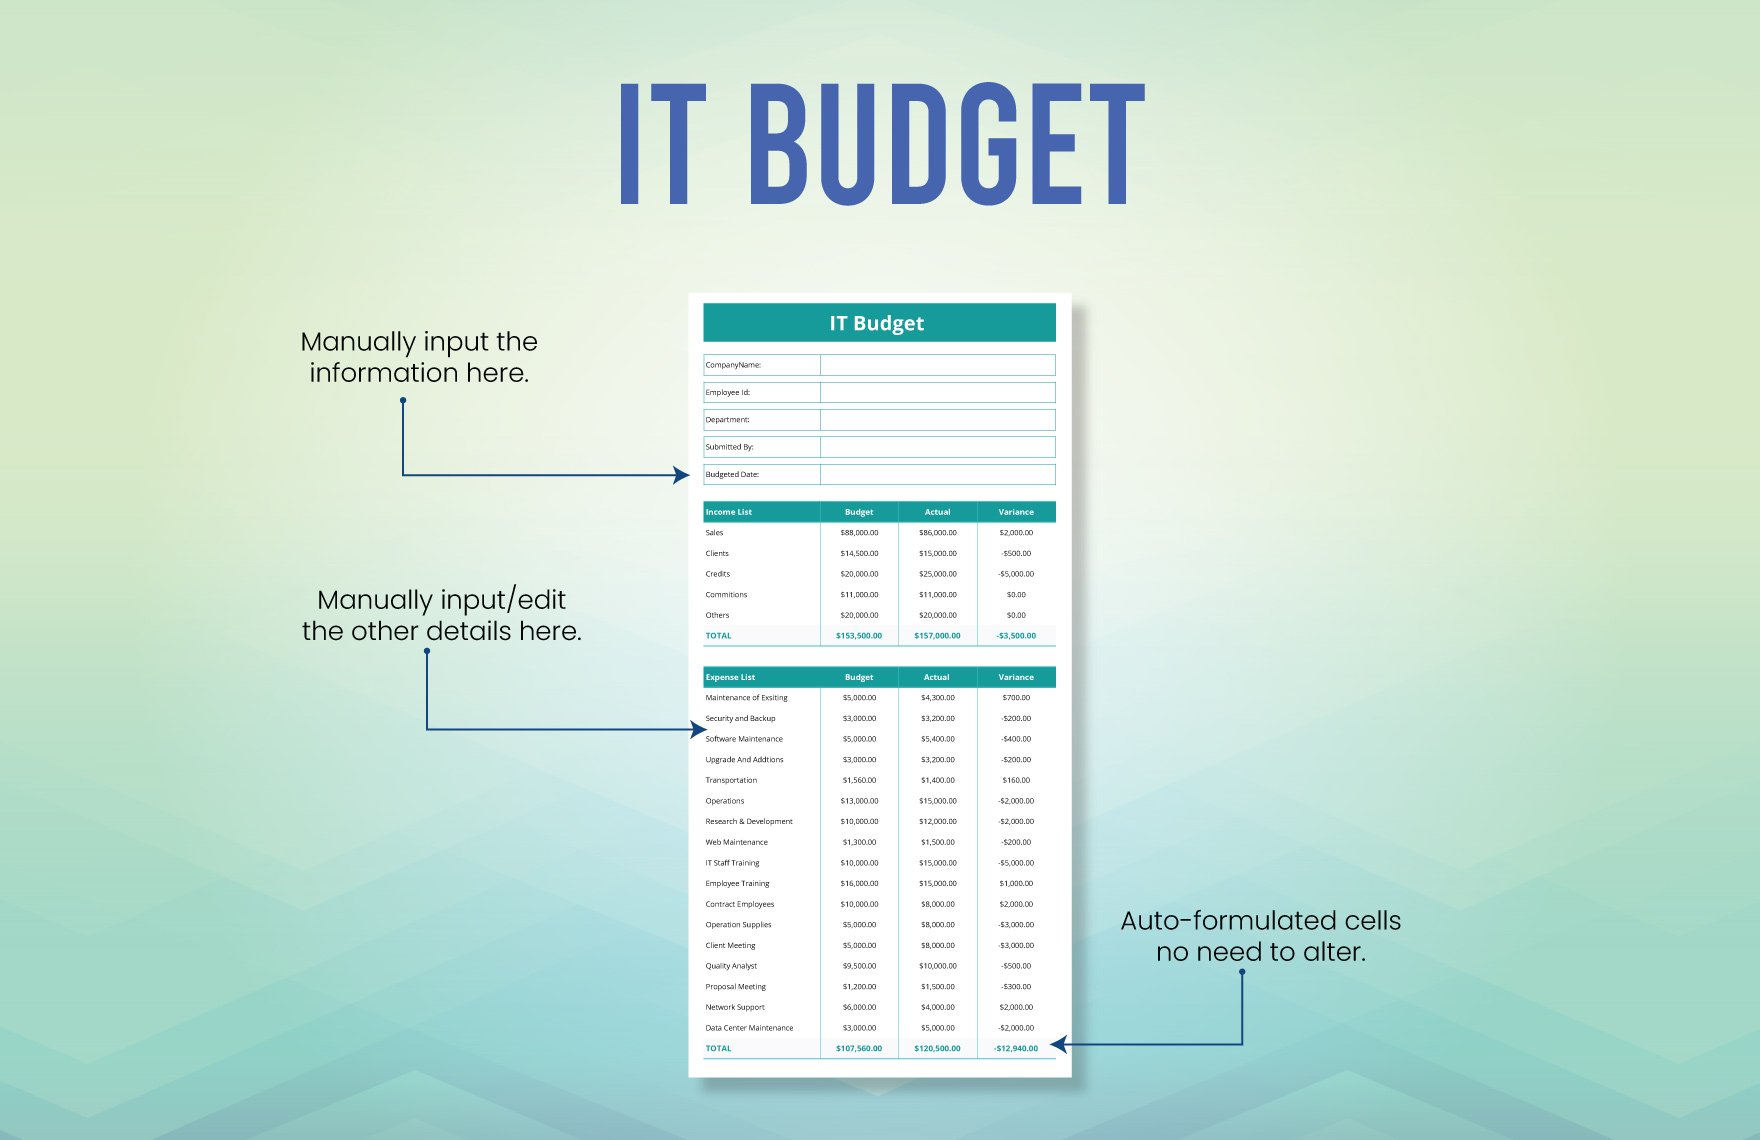 IT Budget Template